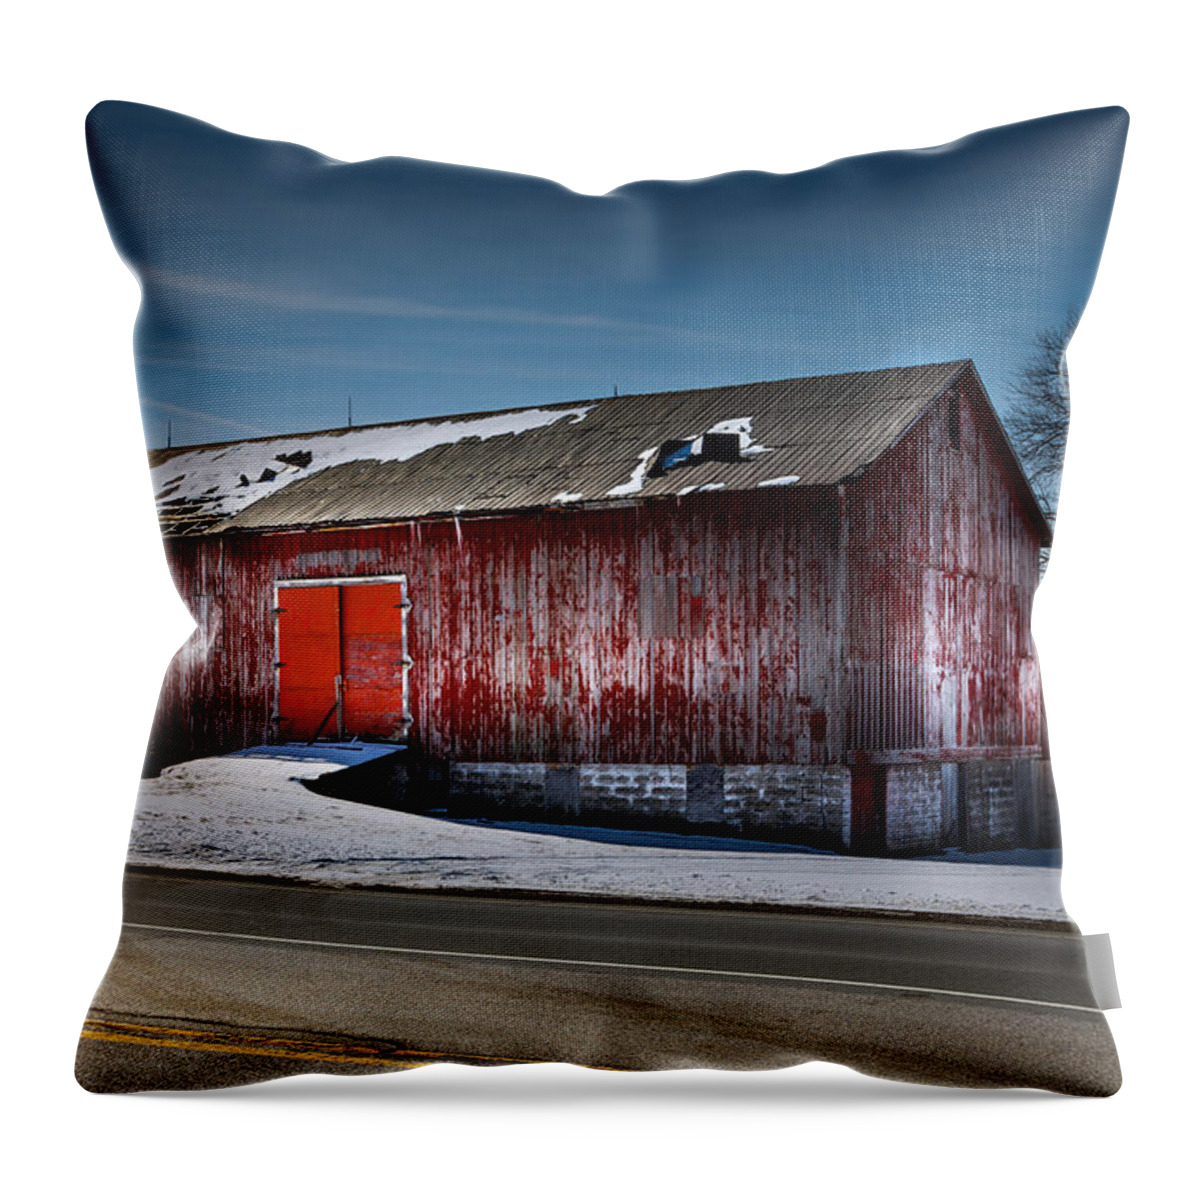 Barn Throw Pillow featuring the photograph The Roadside Barn by Brent Buchner